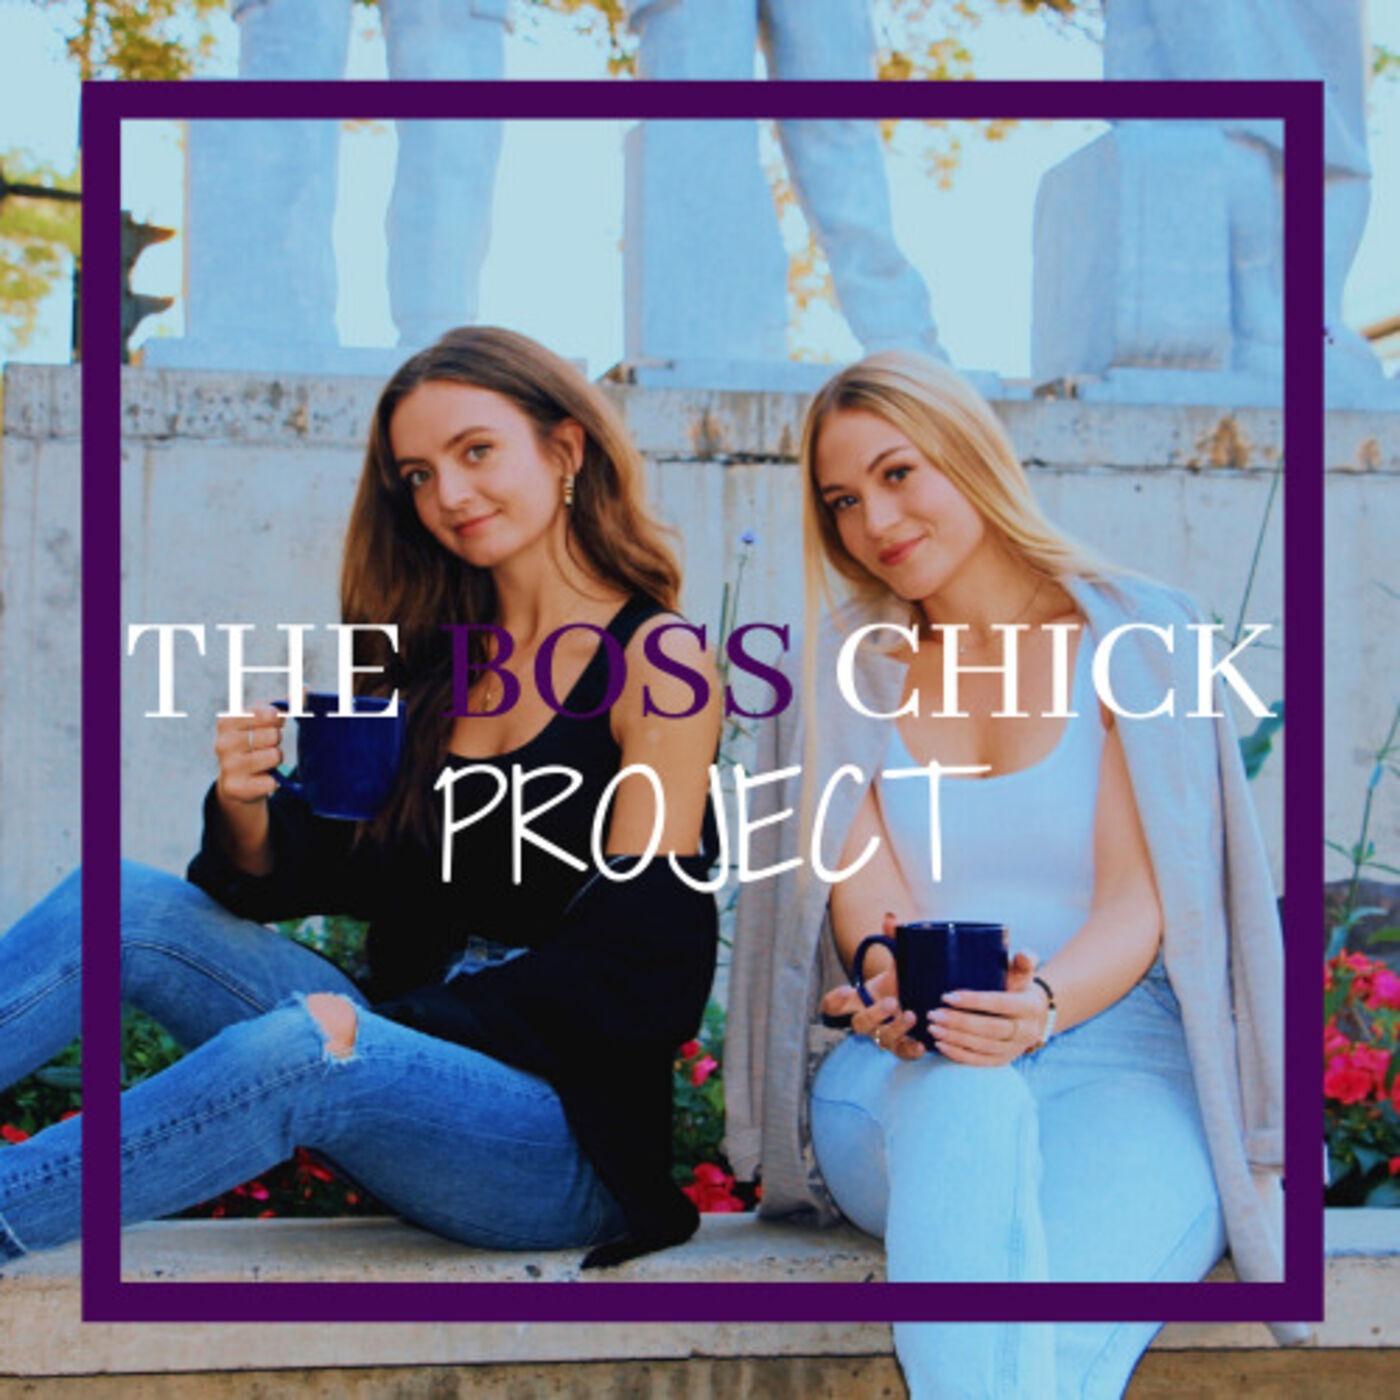 The Boss Chick Project